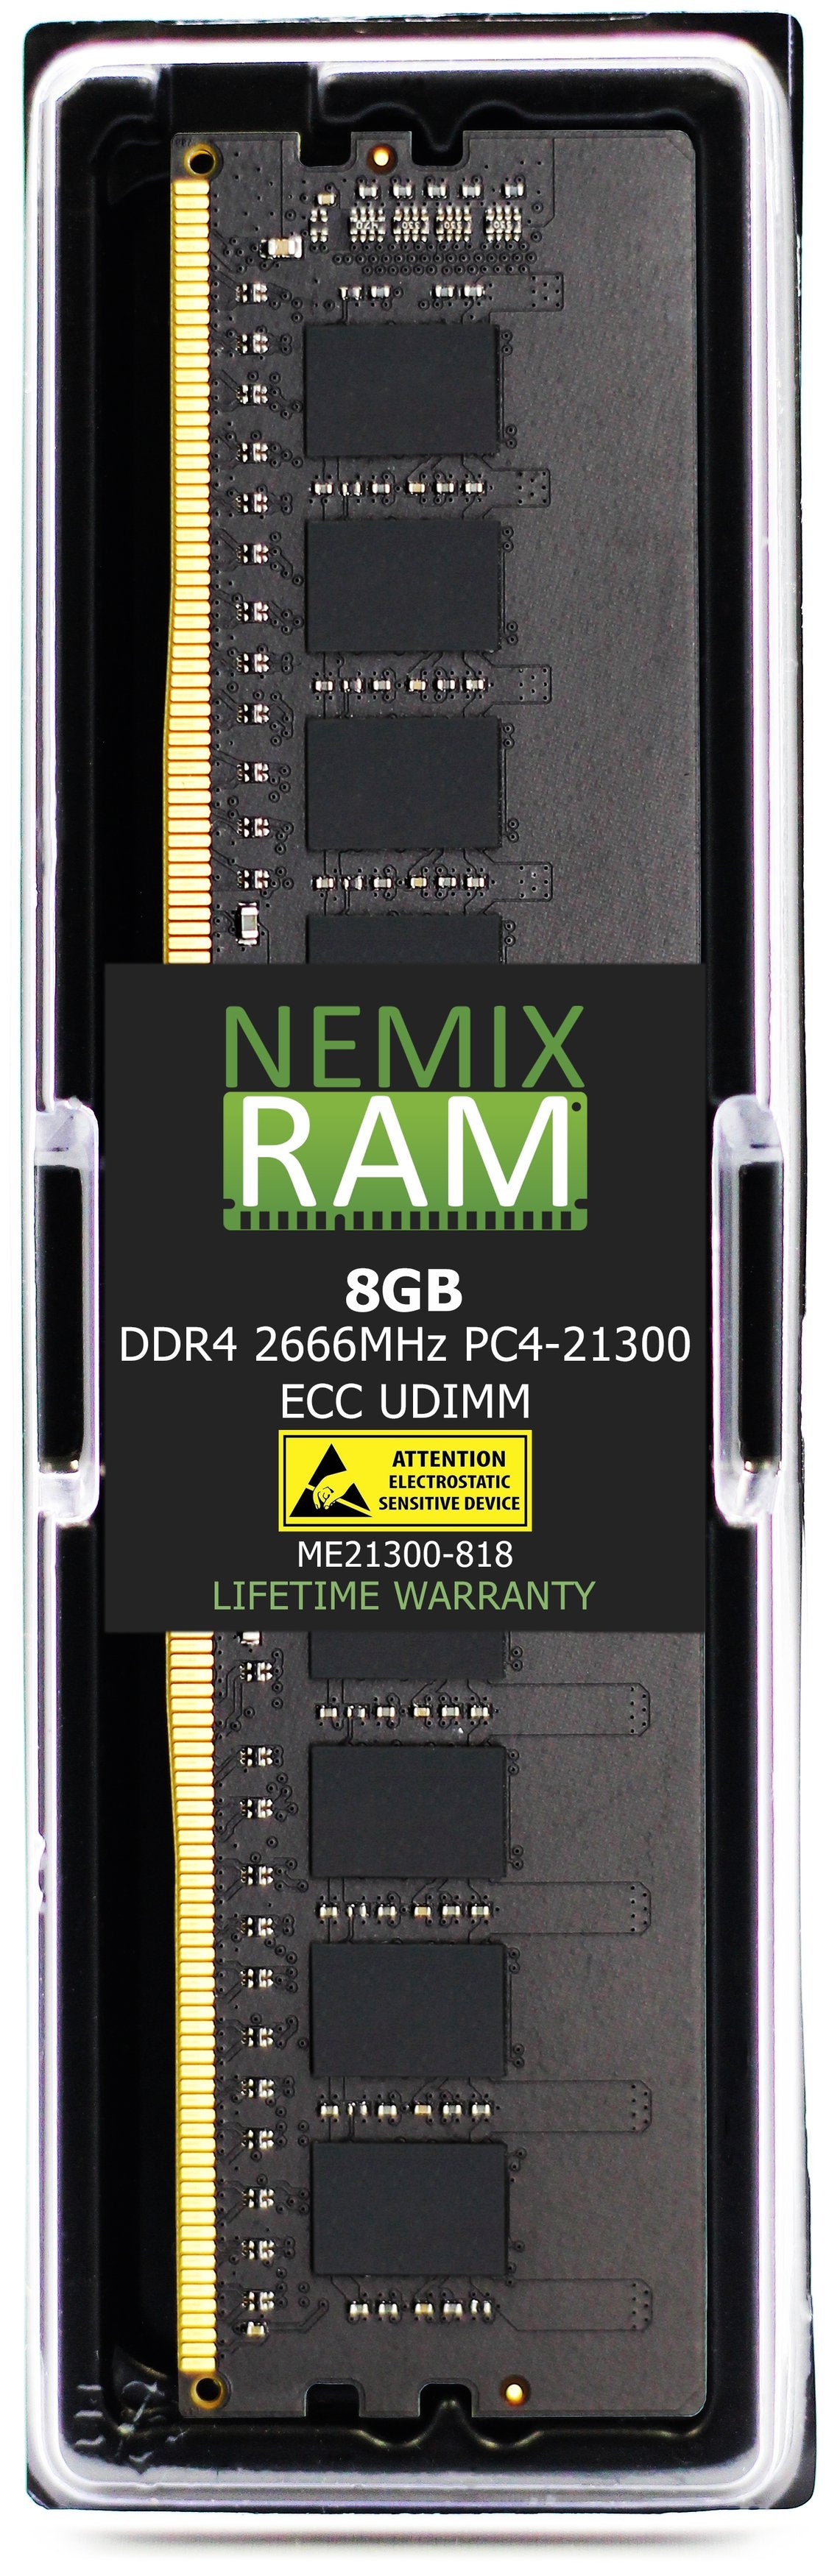 DDR4 2666MHZ PC4-21300 ECC UDIMM Compatible with Synology RackStation RS3621xs+